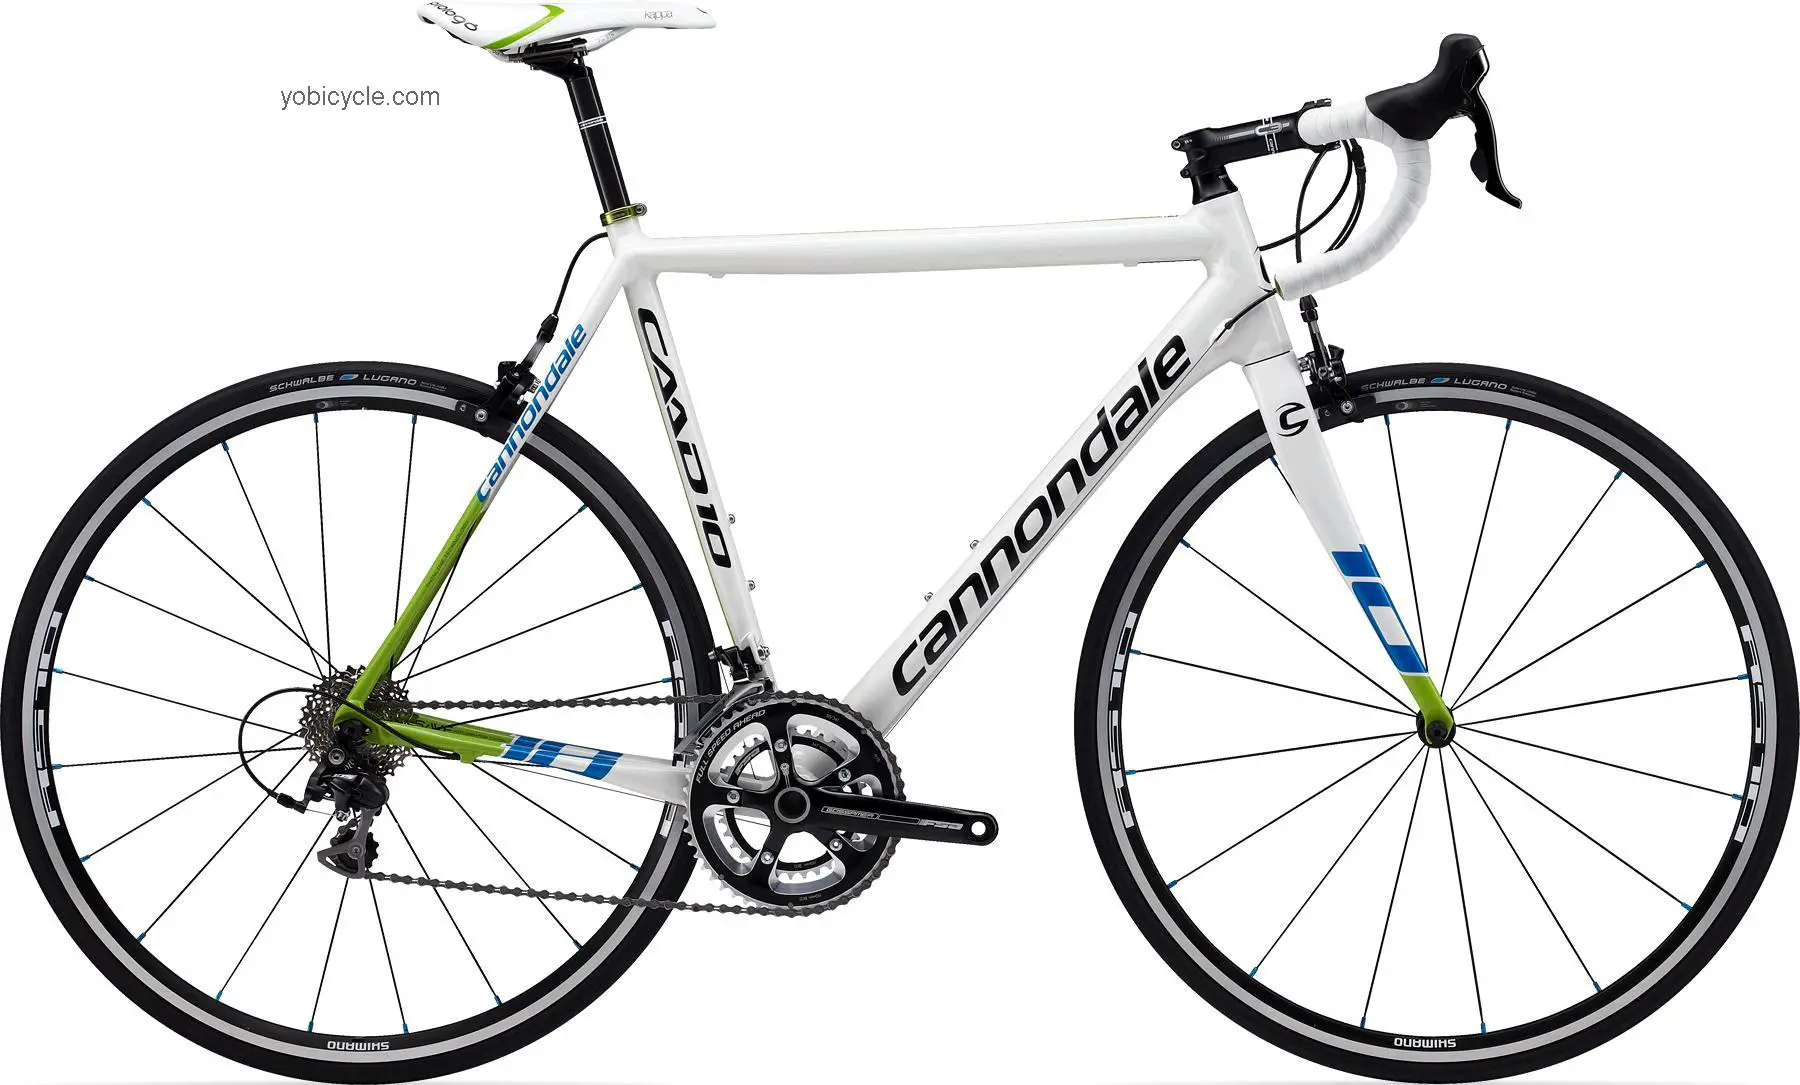 Cannondale CAAD 10 5 105 2012 comparison online with competitors